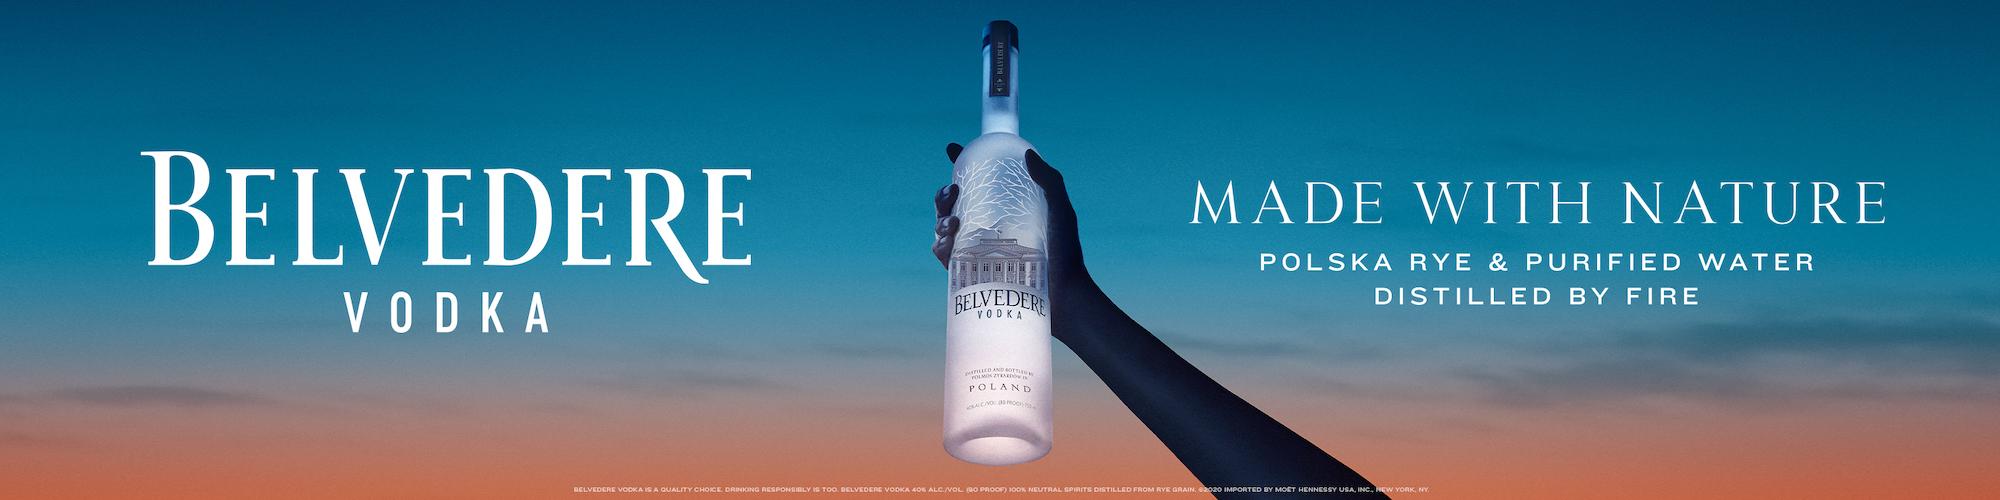 The house of Belvedere proudly uses only natural ingredients in its vodka - Polish rye and water - locally sourced in accordance with the country's rigorous guidelines. The same rules apply to the house's macerated vodkas, made with natural fruits and botanicals.